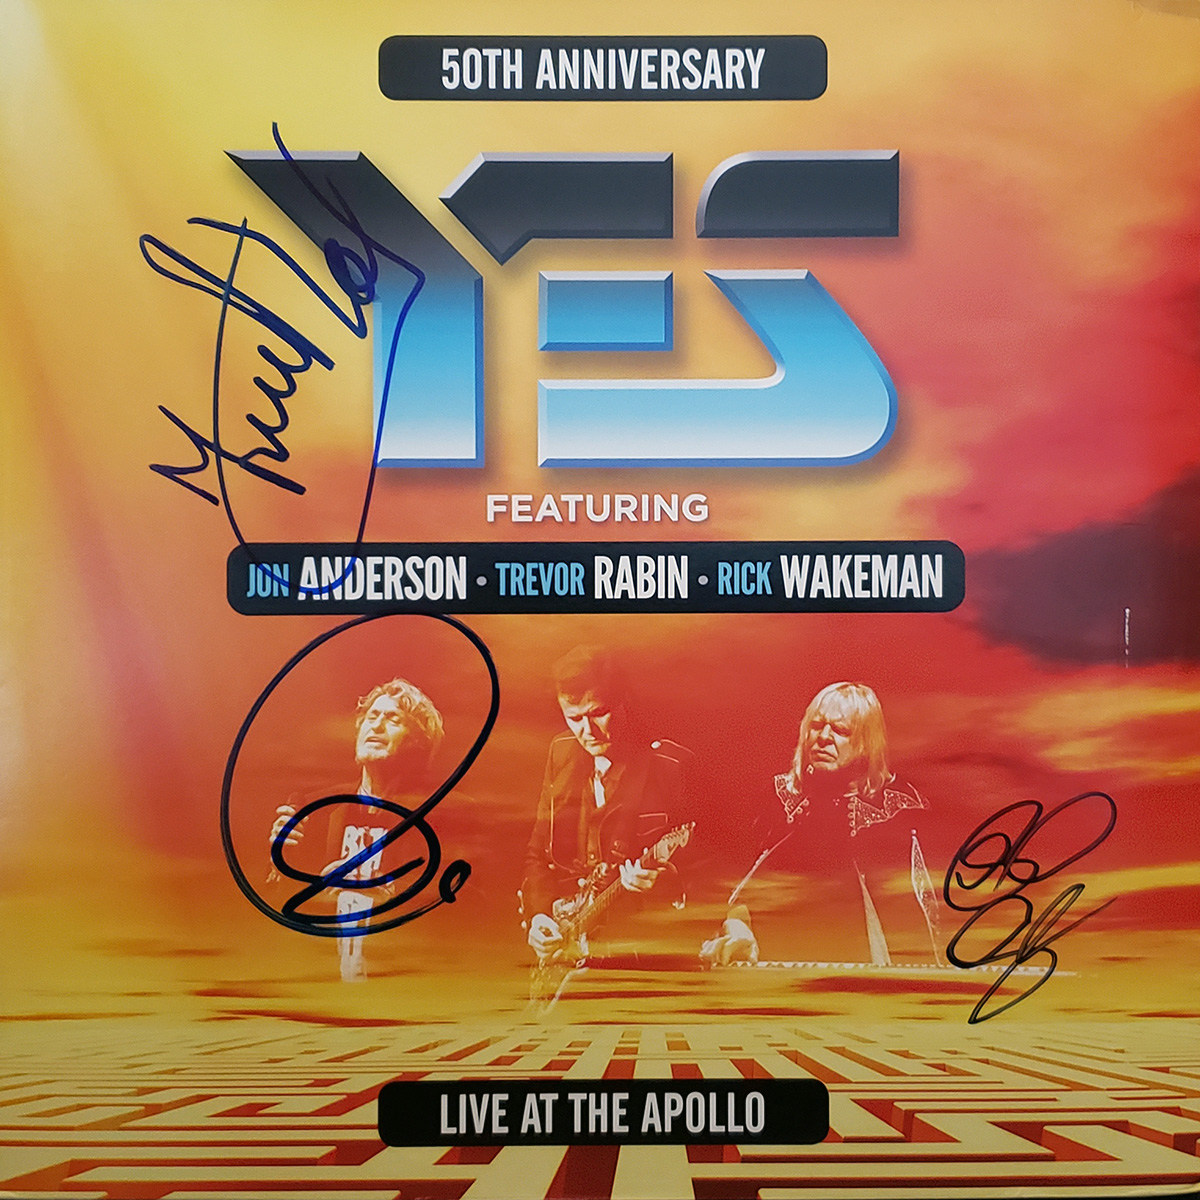 Rick Wakeman of YES band autographed 8x10 phtot reprint 